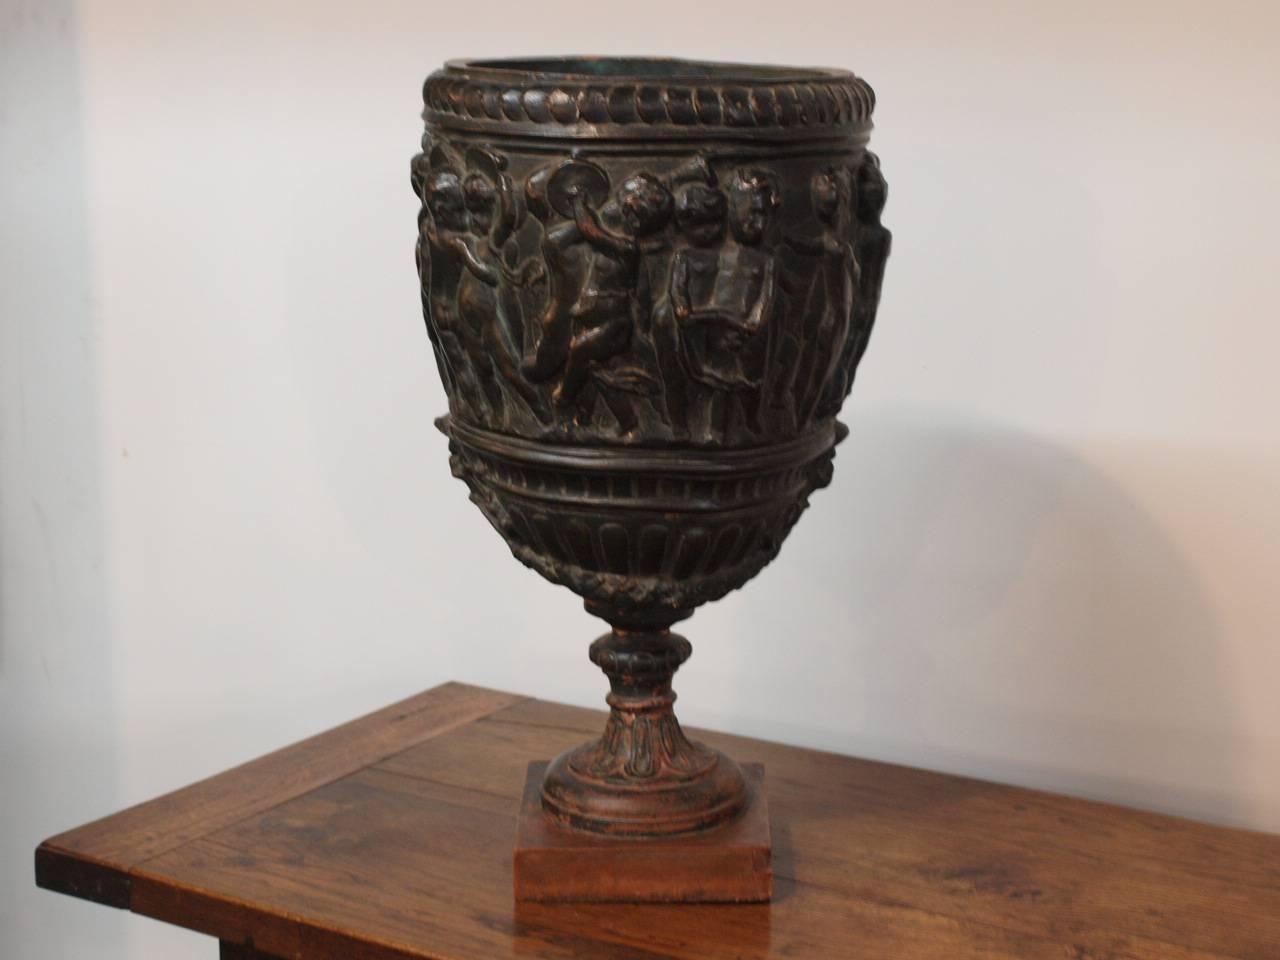 A stunning 19th century patinated terracotta urn from Northern Italy. This magnificent urn is adorned with festive putti, or cherubs, playing musical instruments in celebration, all raised on a square base. This is a spectacular piece, especially